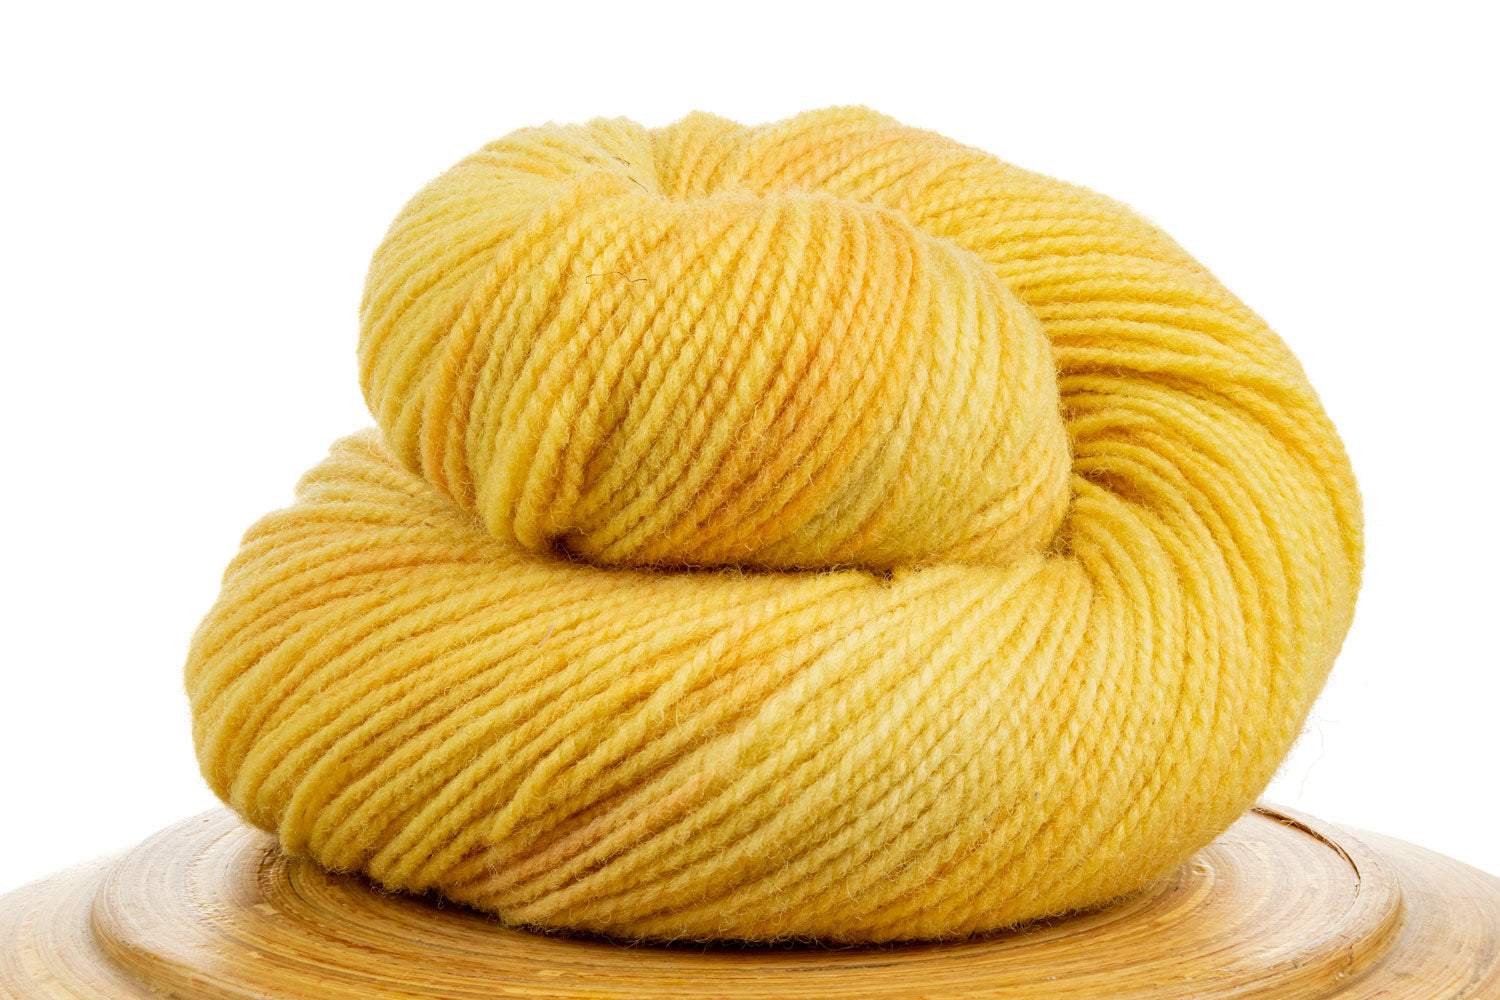 Winfield Canadian hand-dyed yarn in Lemonade, a bright sunny yellow